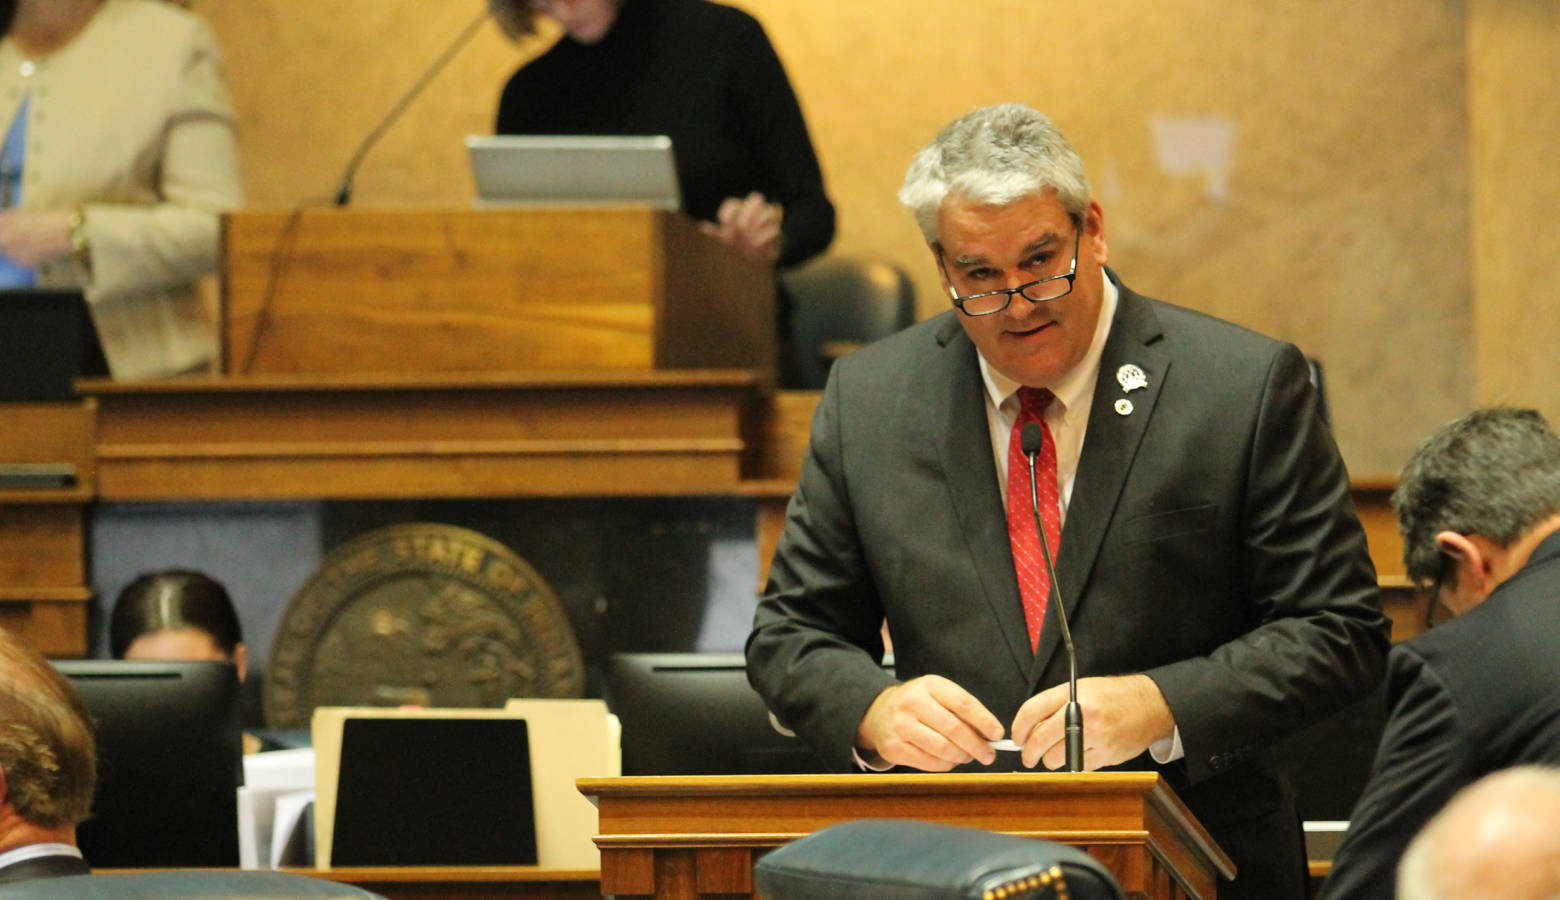 Legislation authored by Sen. Andy Zay (R-Huntington) will increase the maximum number of children allowed in a foster home from five to six. (Lauren Chapman/IPB News)